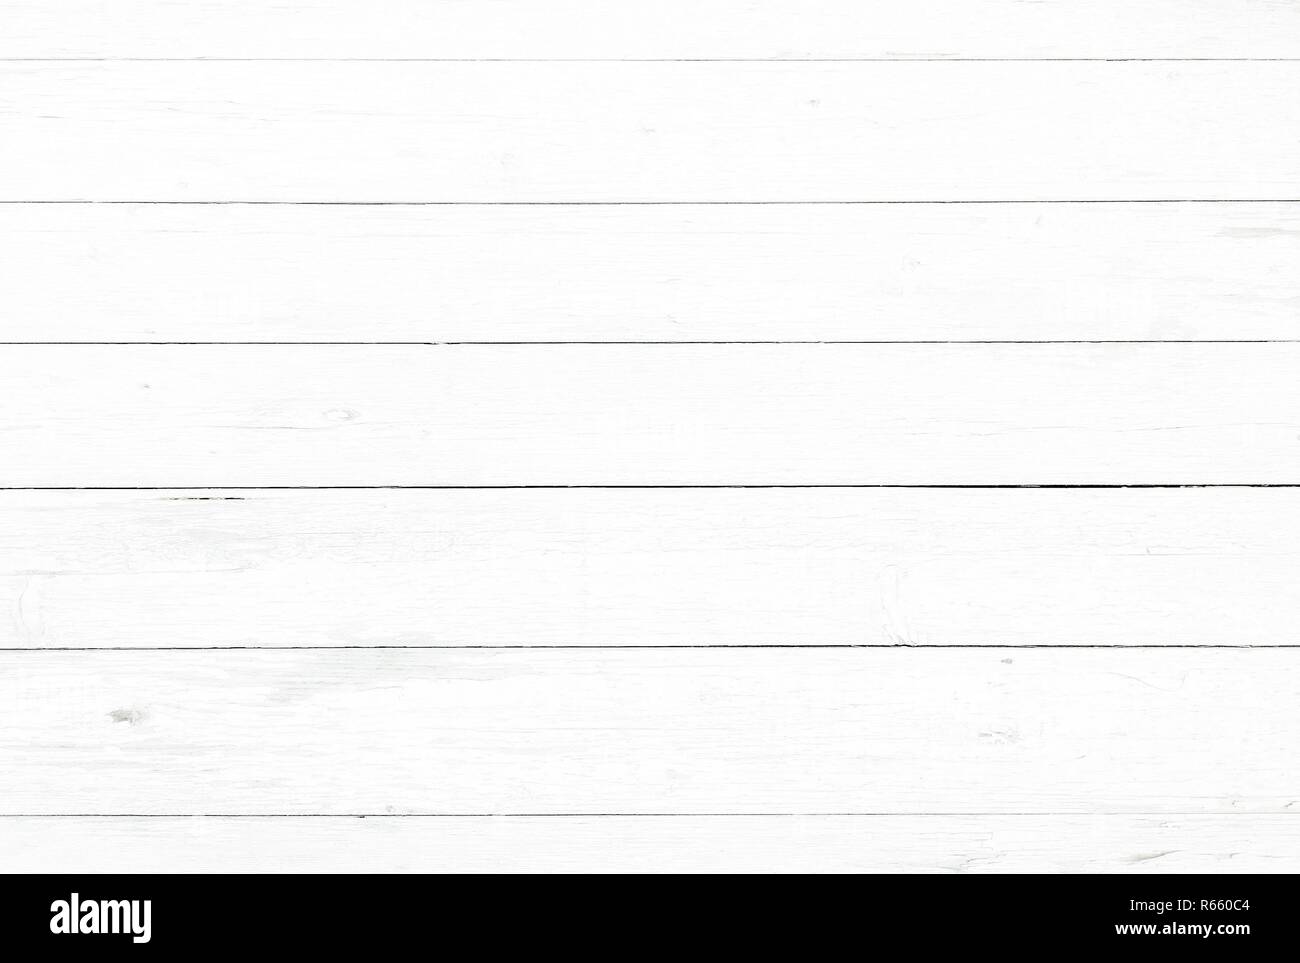 Wood texture background, wood planks. Grunge wood, painted wooden wall pattern. Stock Photo